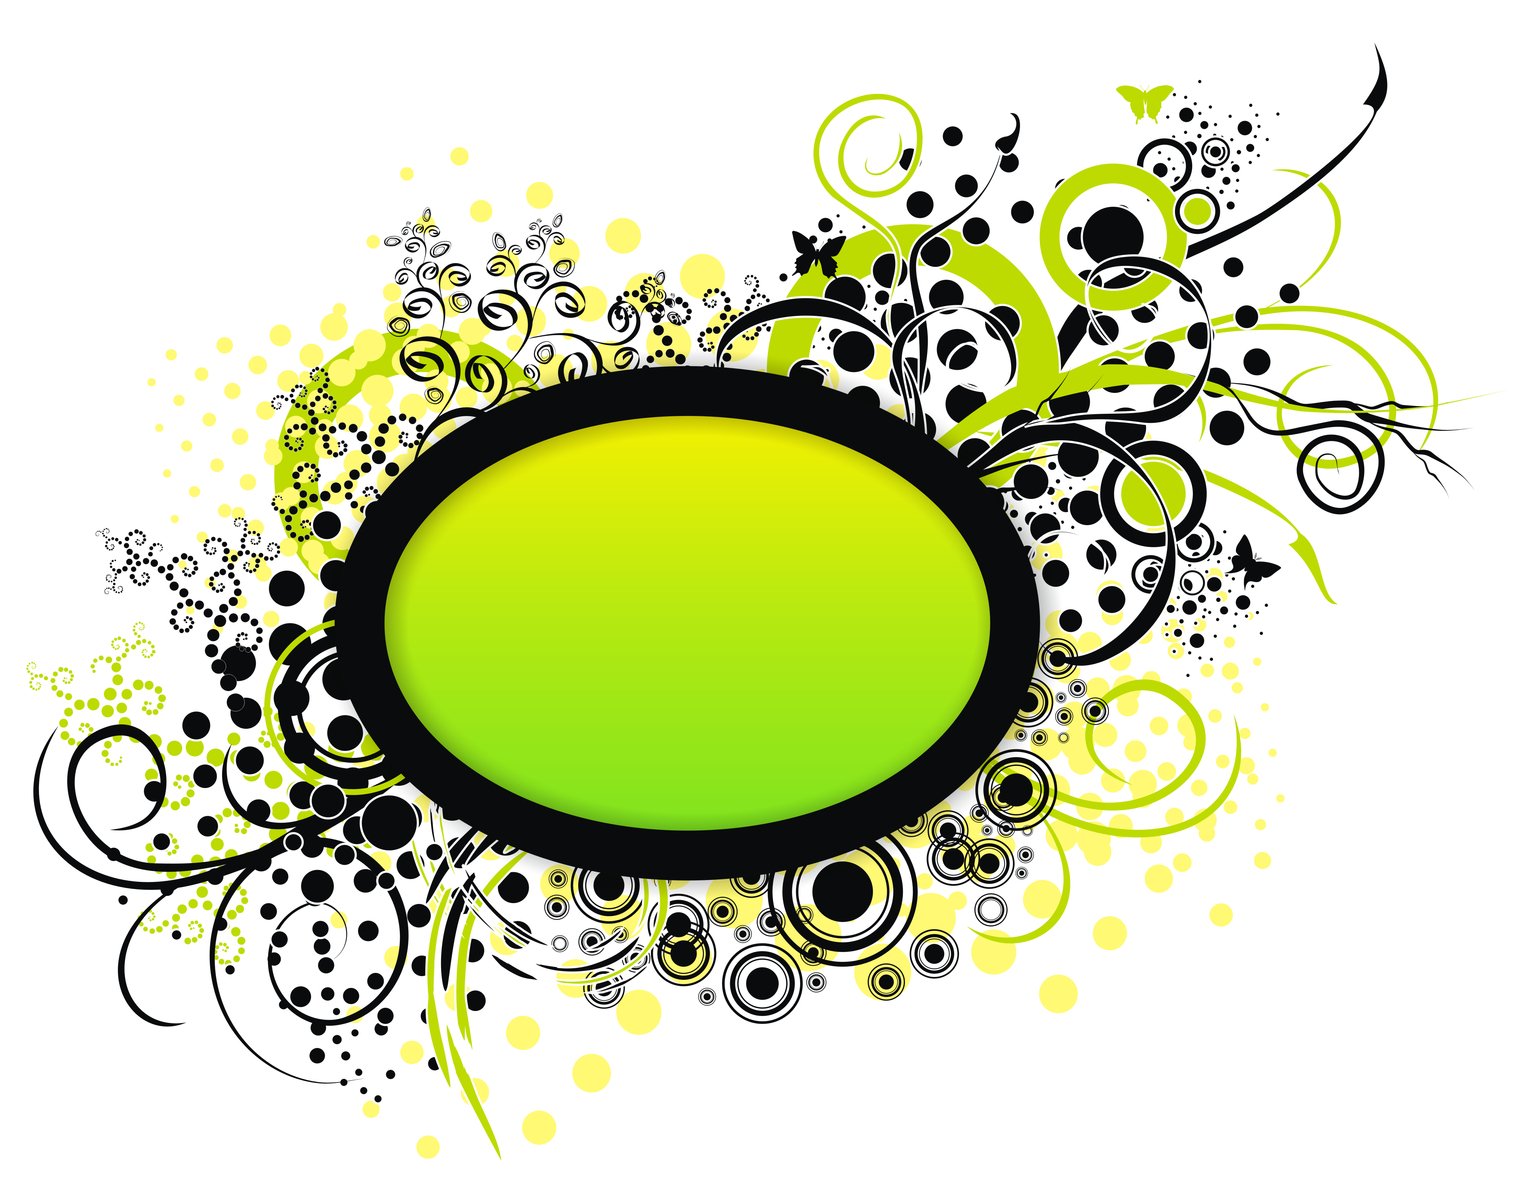 a green circle with black swirls on white background